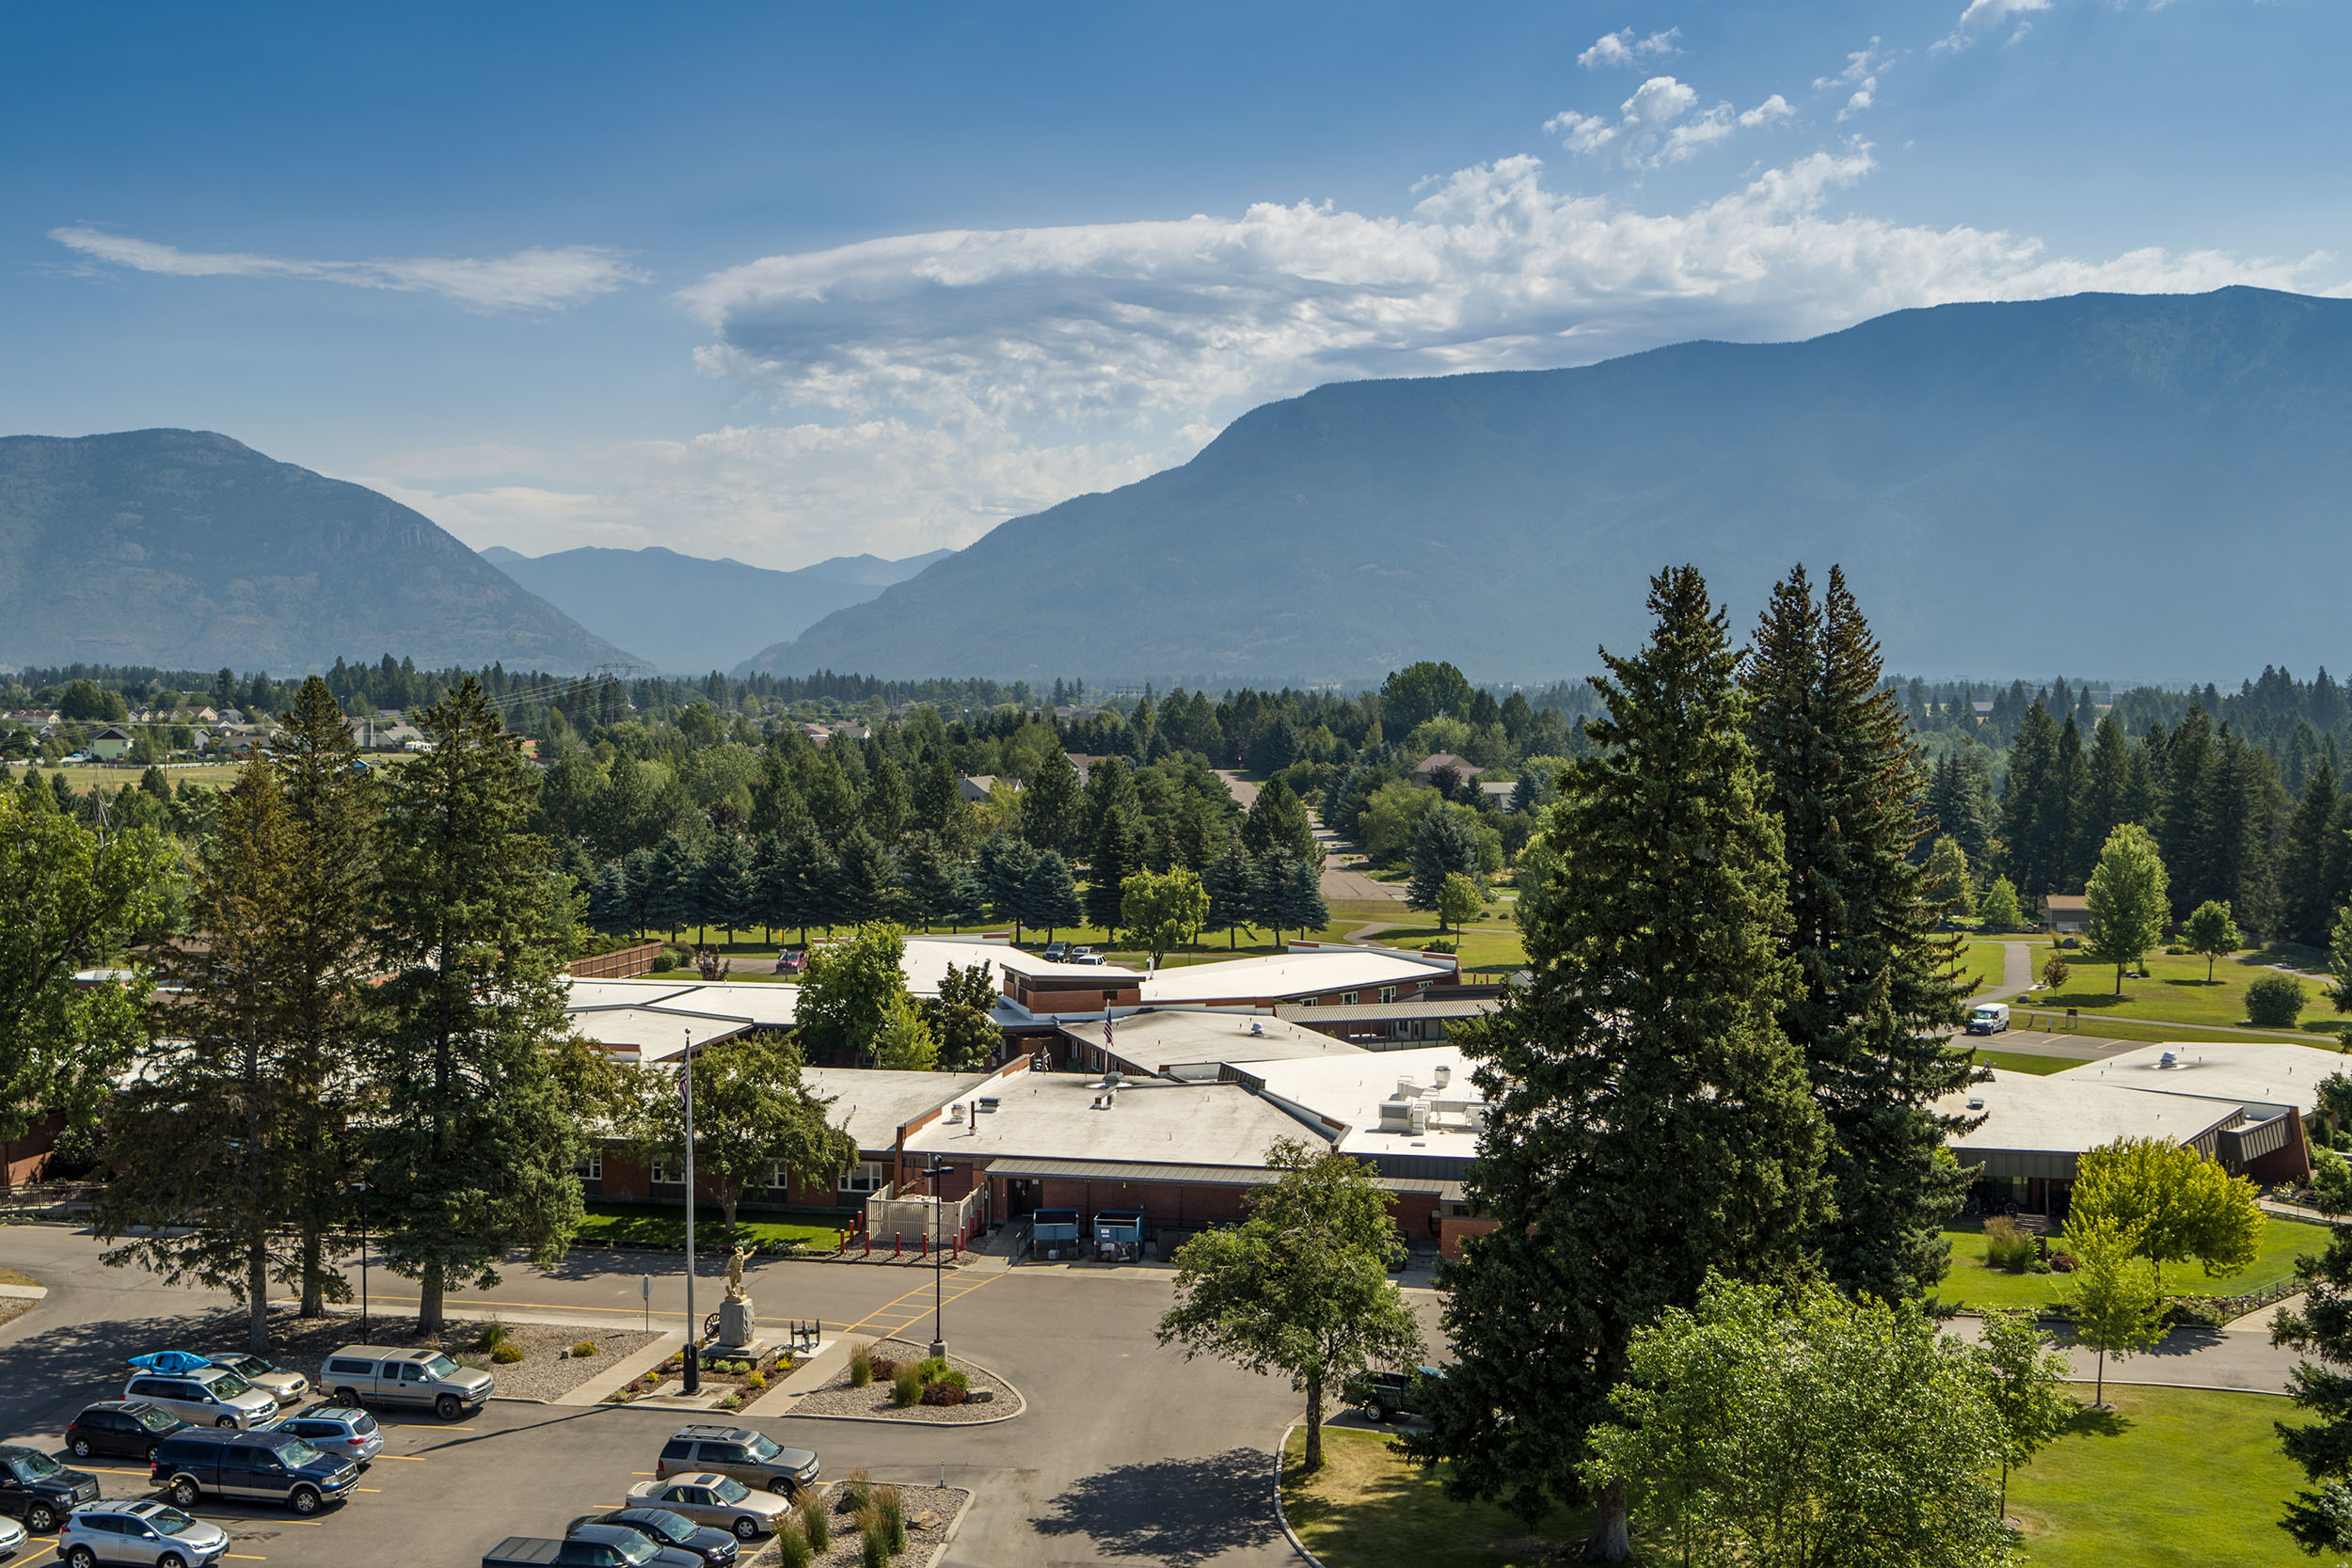 An aerial view of the grounds of the Montana Veterans home. There are large mountains in the background, as well as many trees. There is also a parking lot and several buildings.